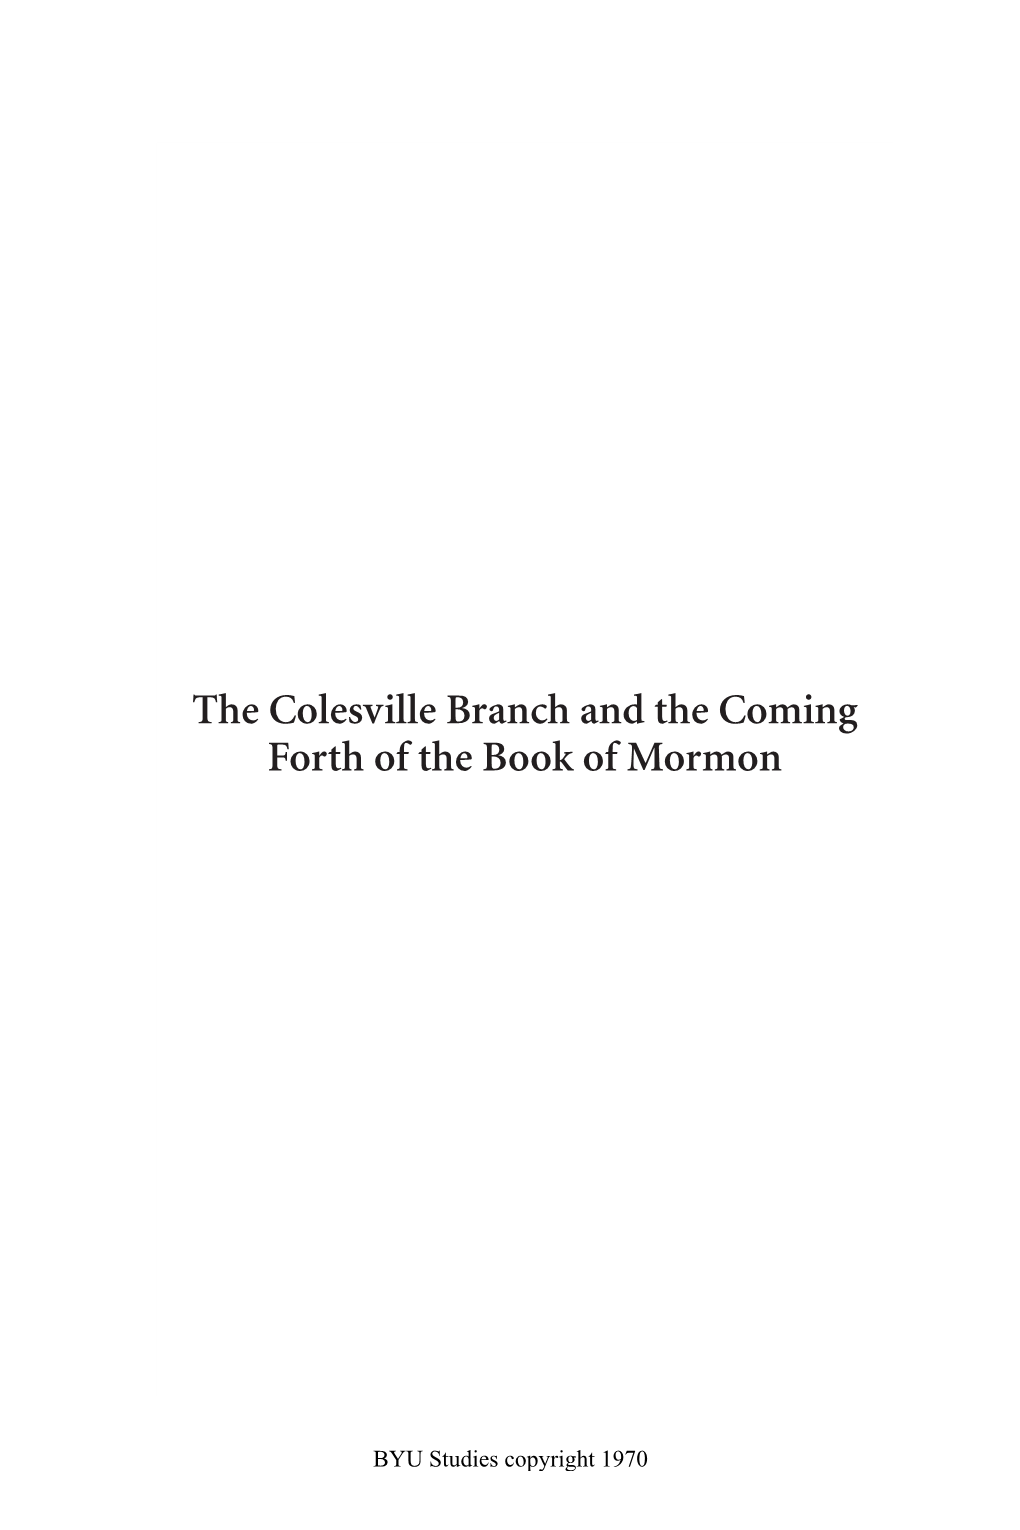 The Colesville Branch and the Coming Forth of the Book of Mormon